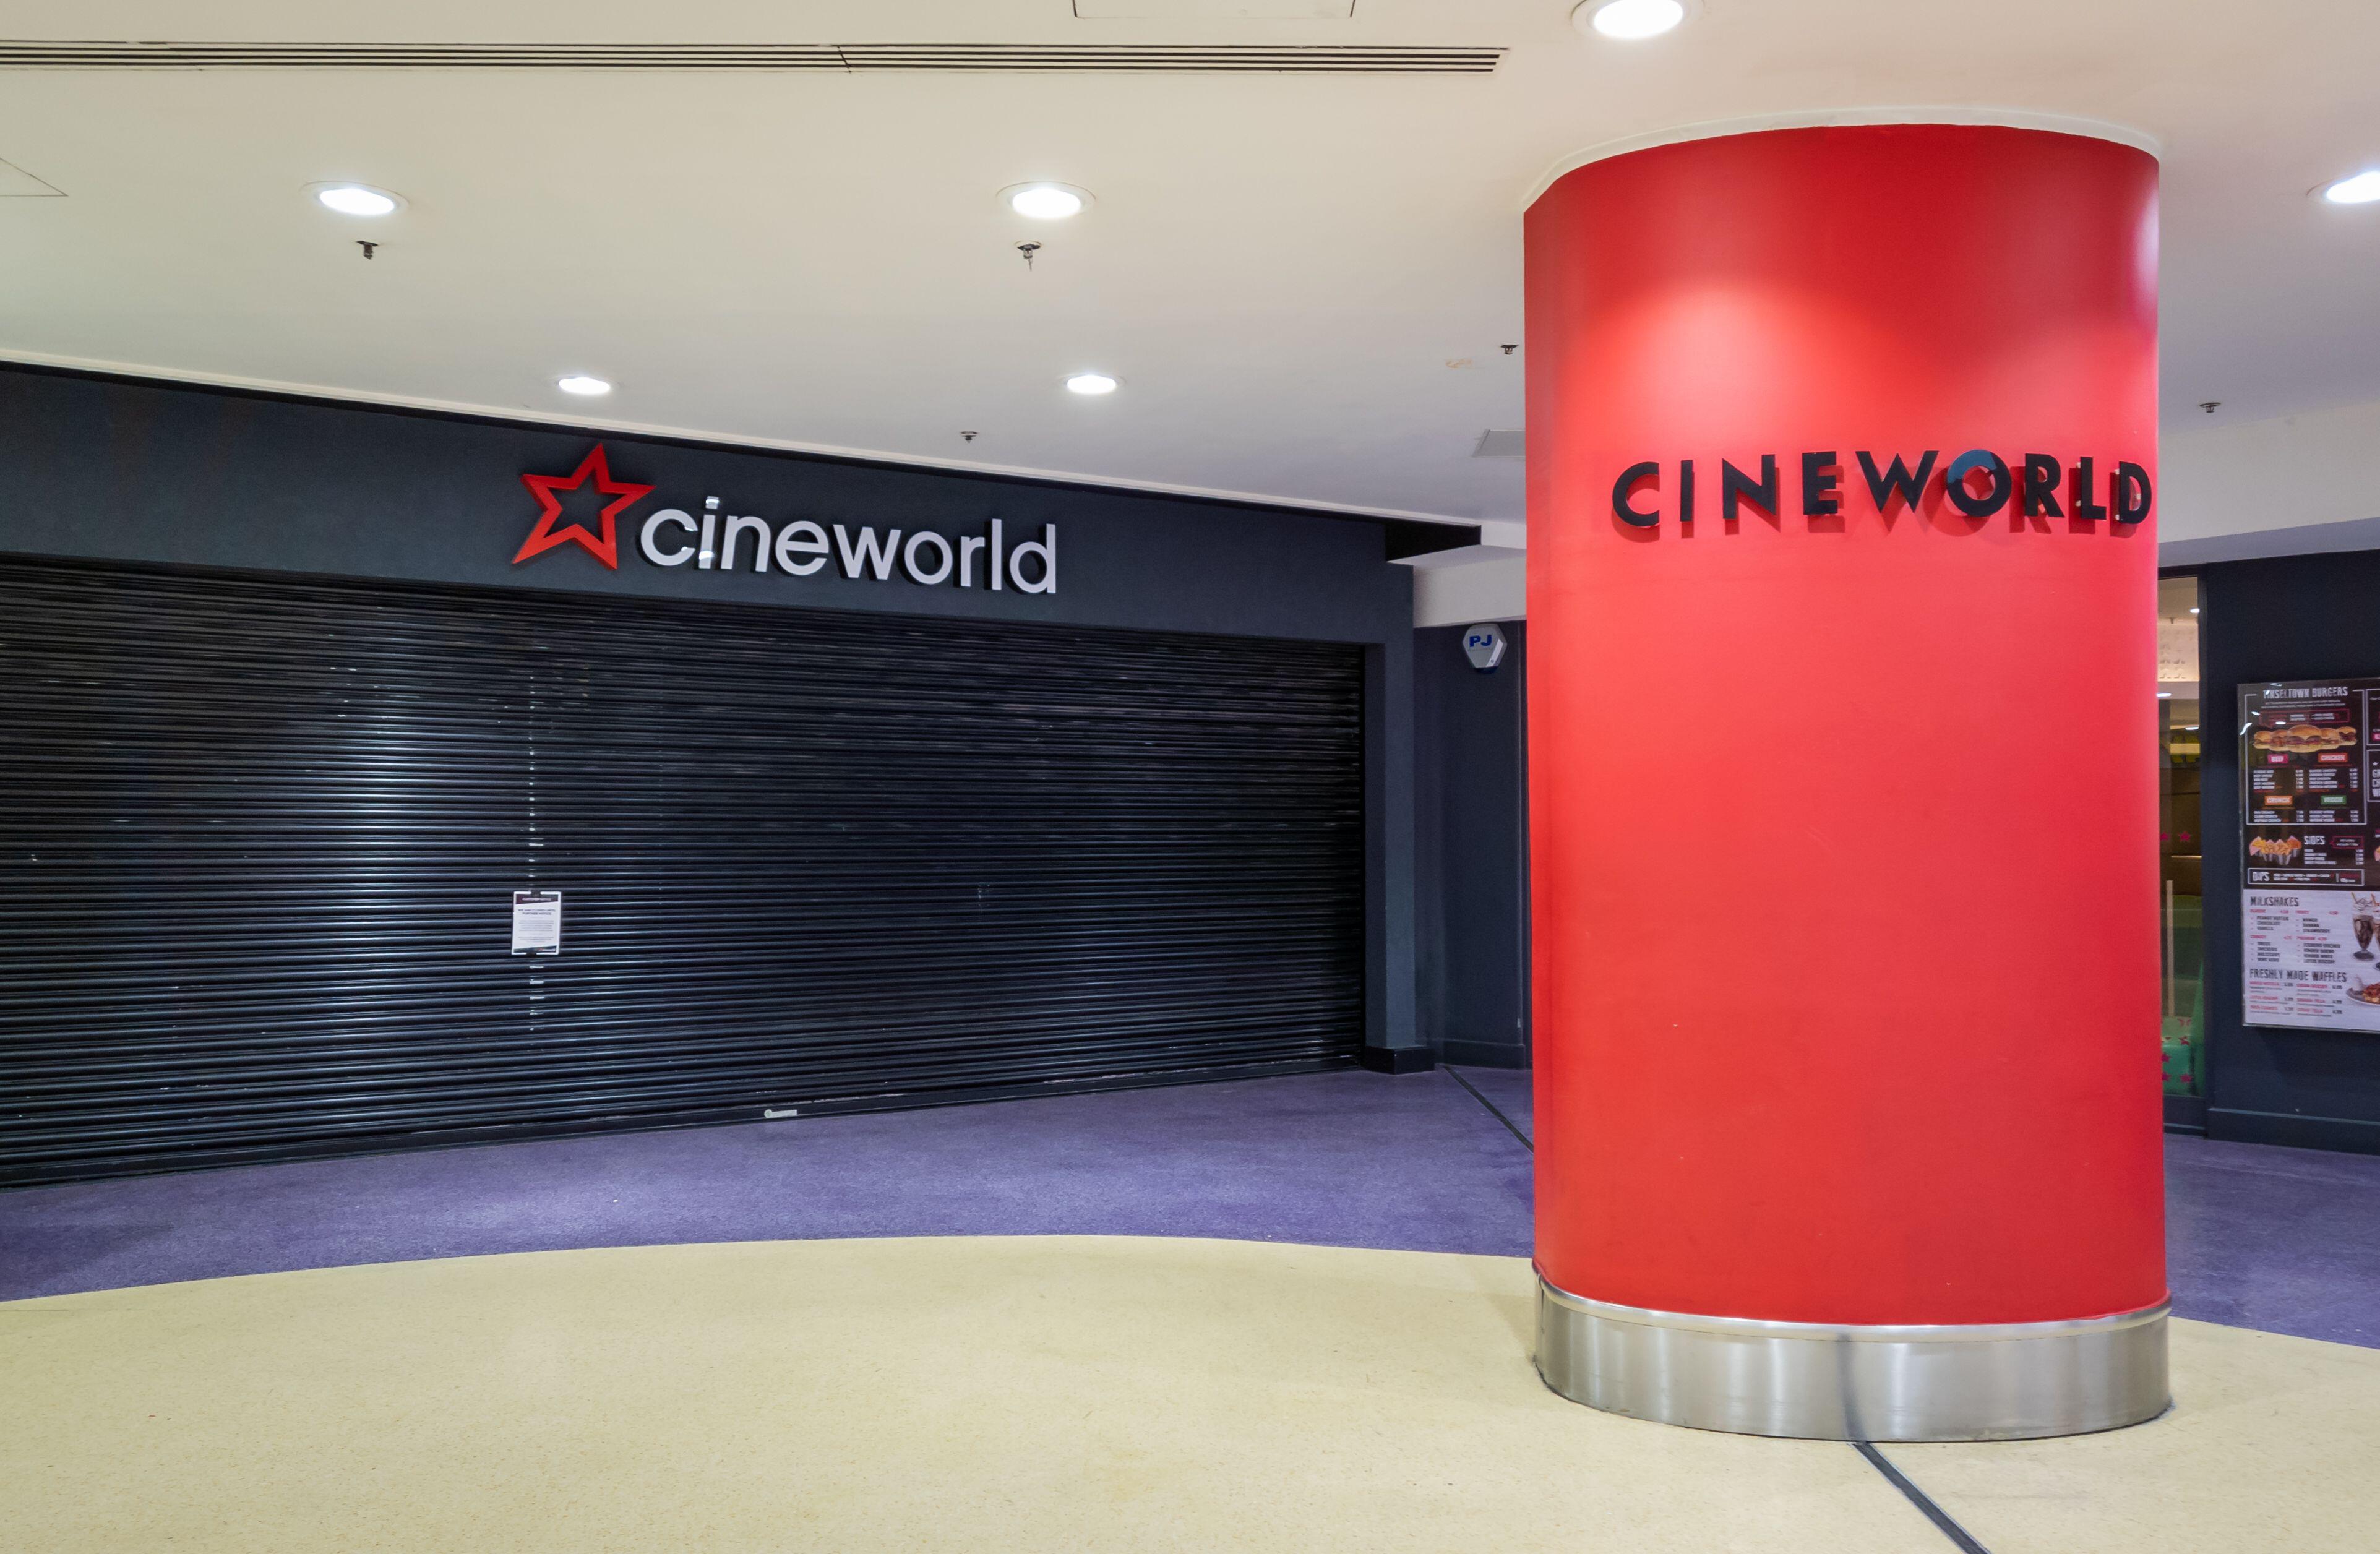 A Cineworld branch shut during the Covid pandemic